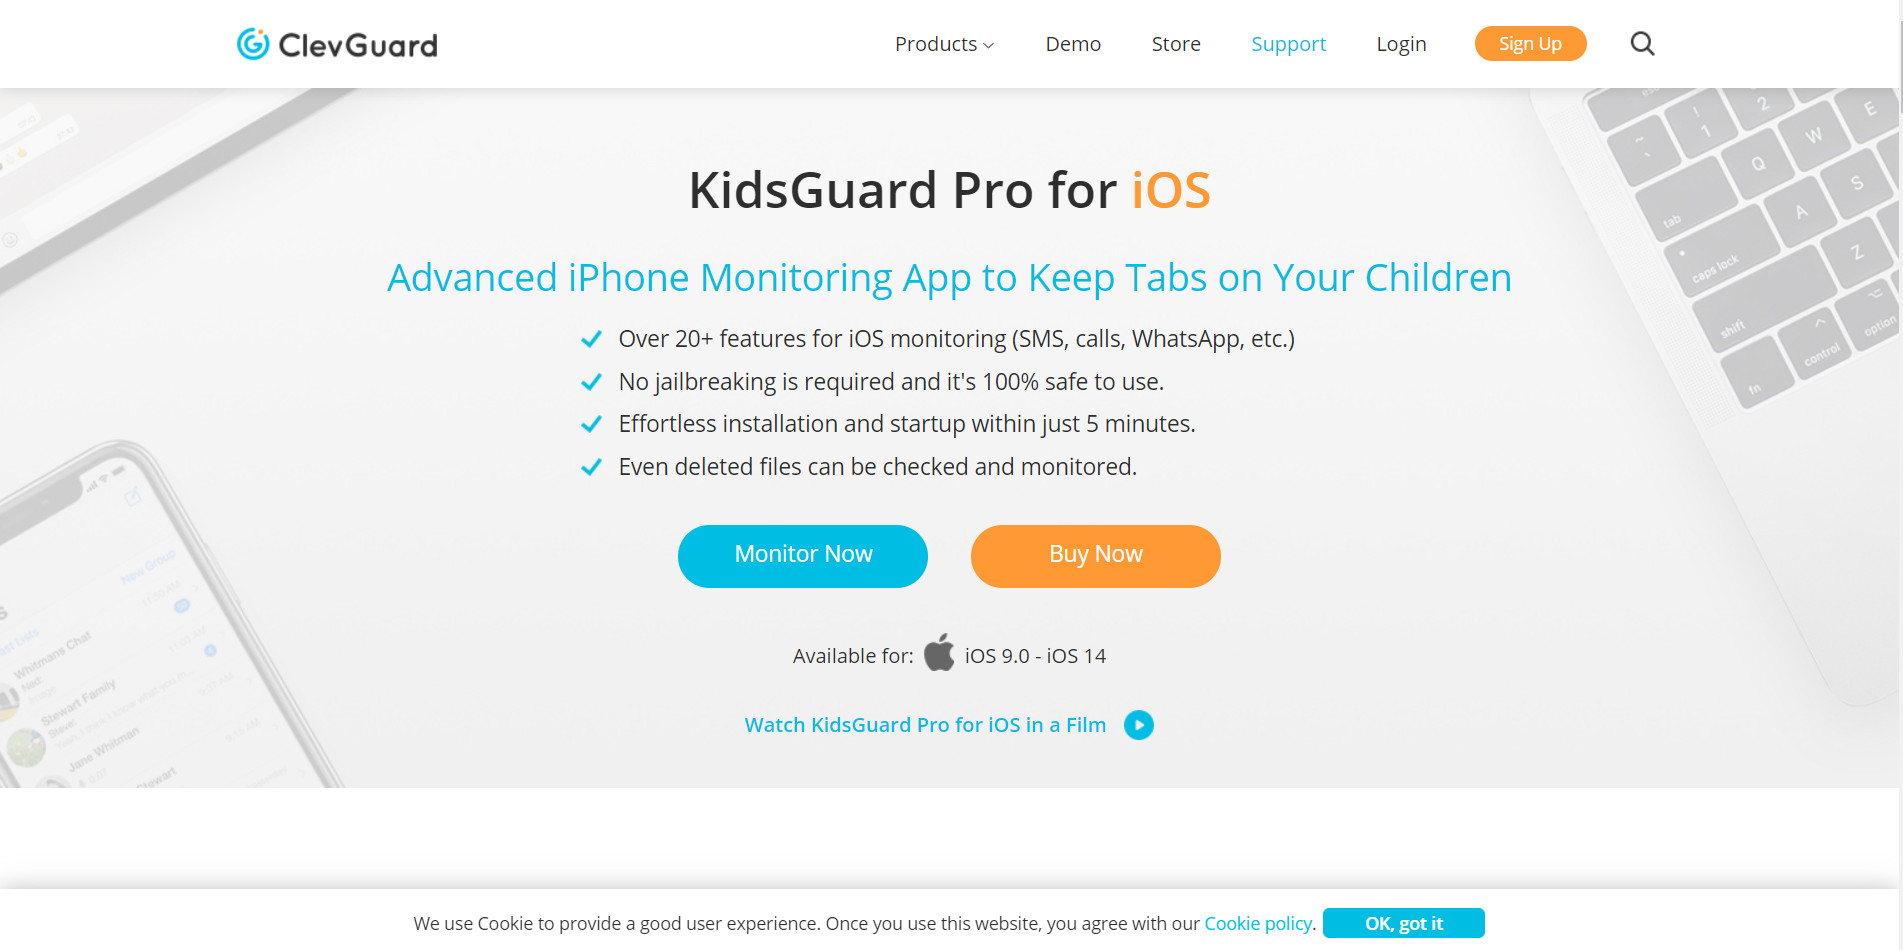 KidsGuard-Pro-for-iOS-Leading-iPhone-Monitoring-App-without-Jailbreak